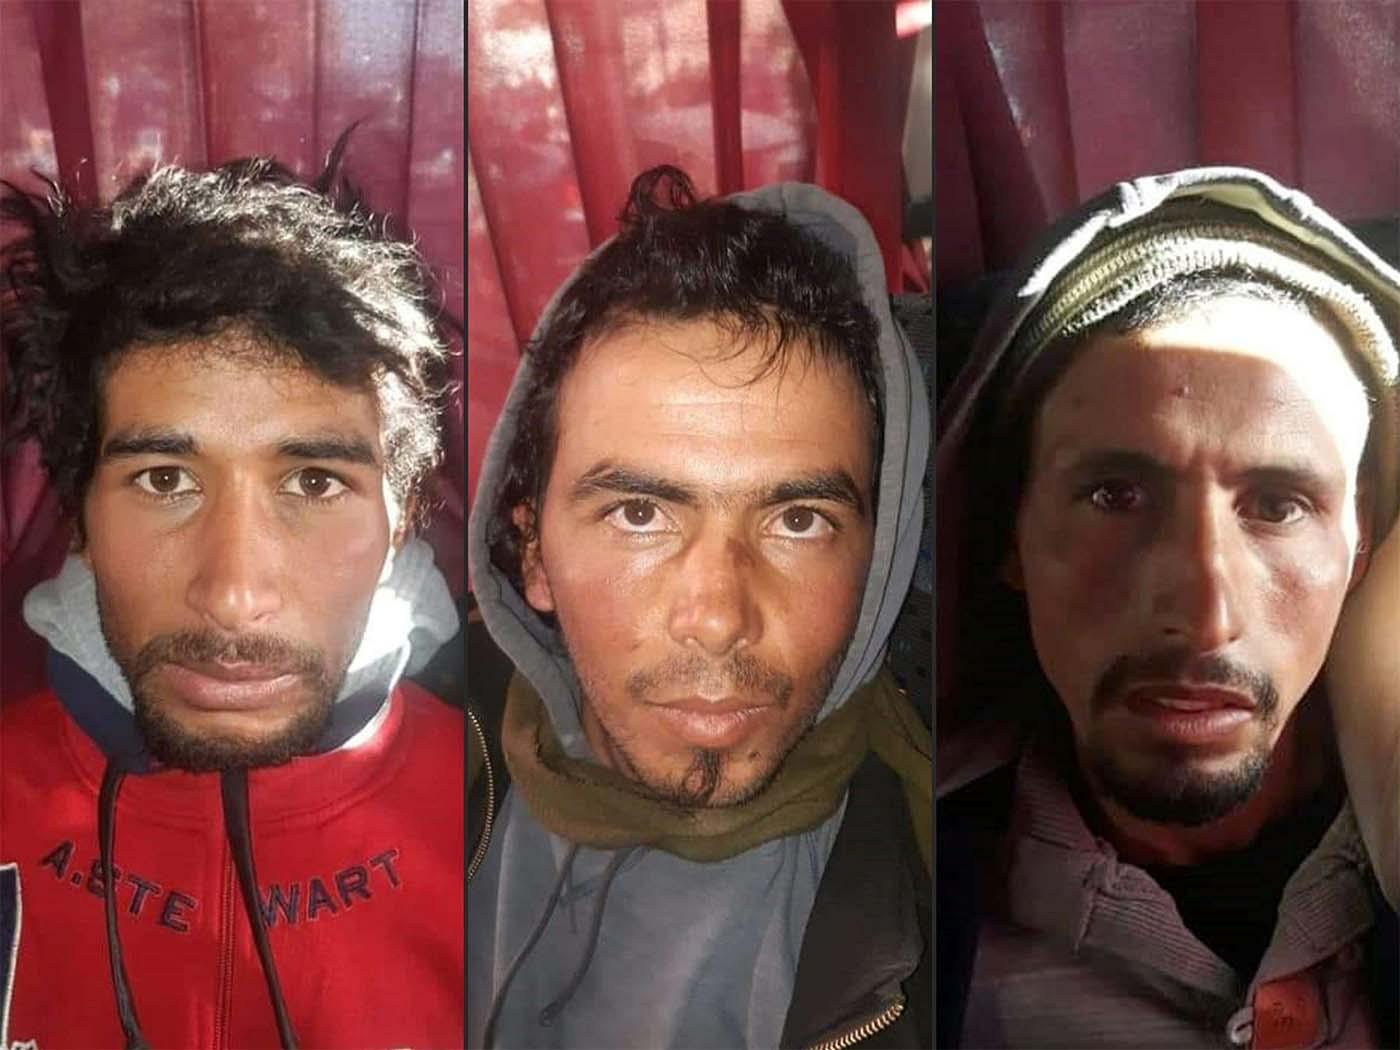 The three suspects in the grisly murder of two Scandinavian hikers 